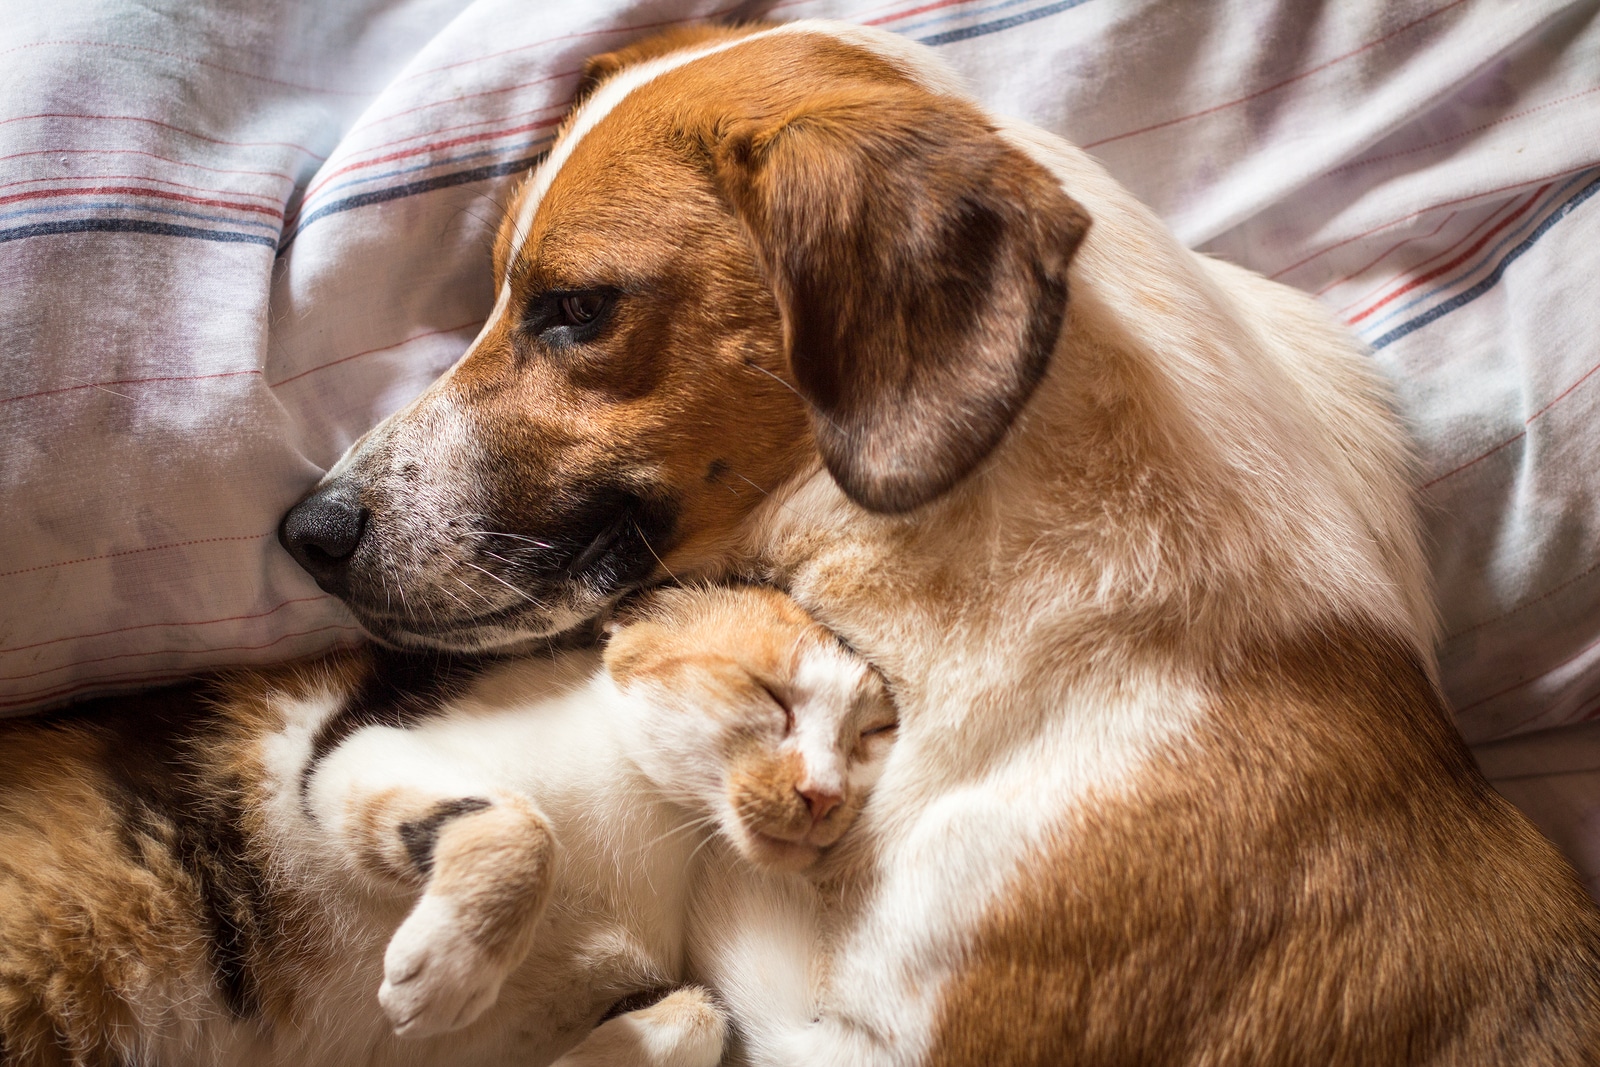 A brown dog and cat wake up hugging from a nap